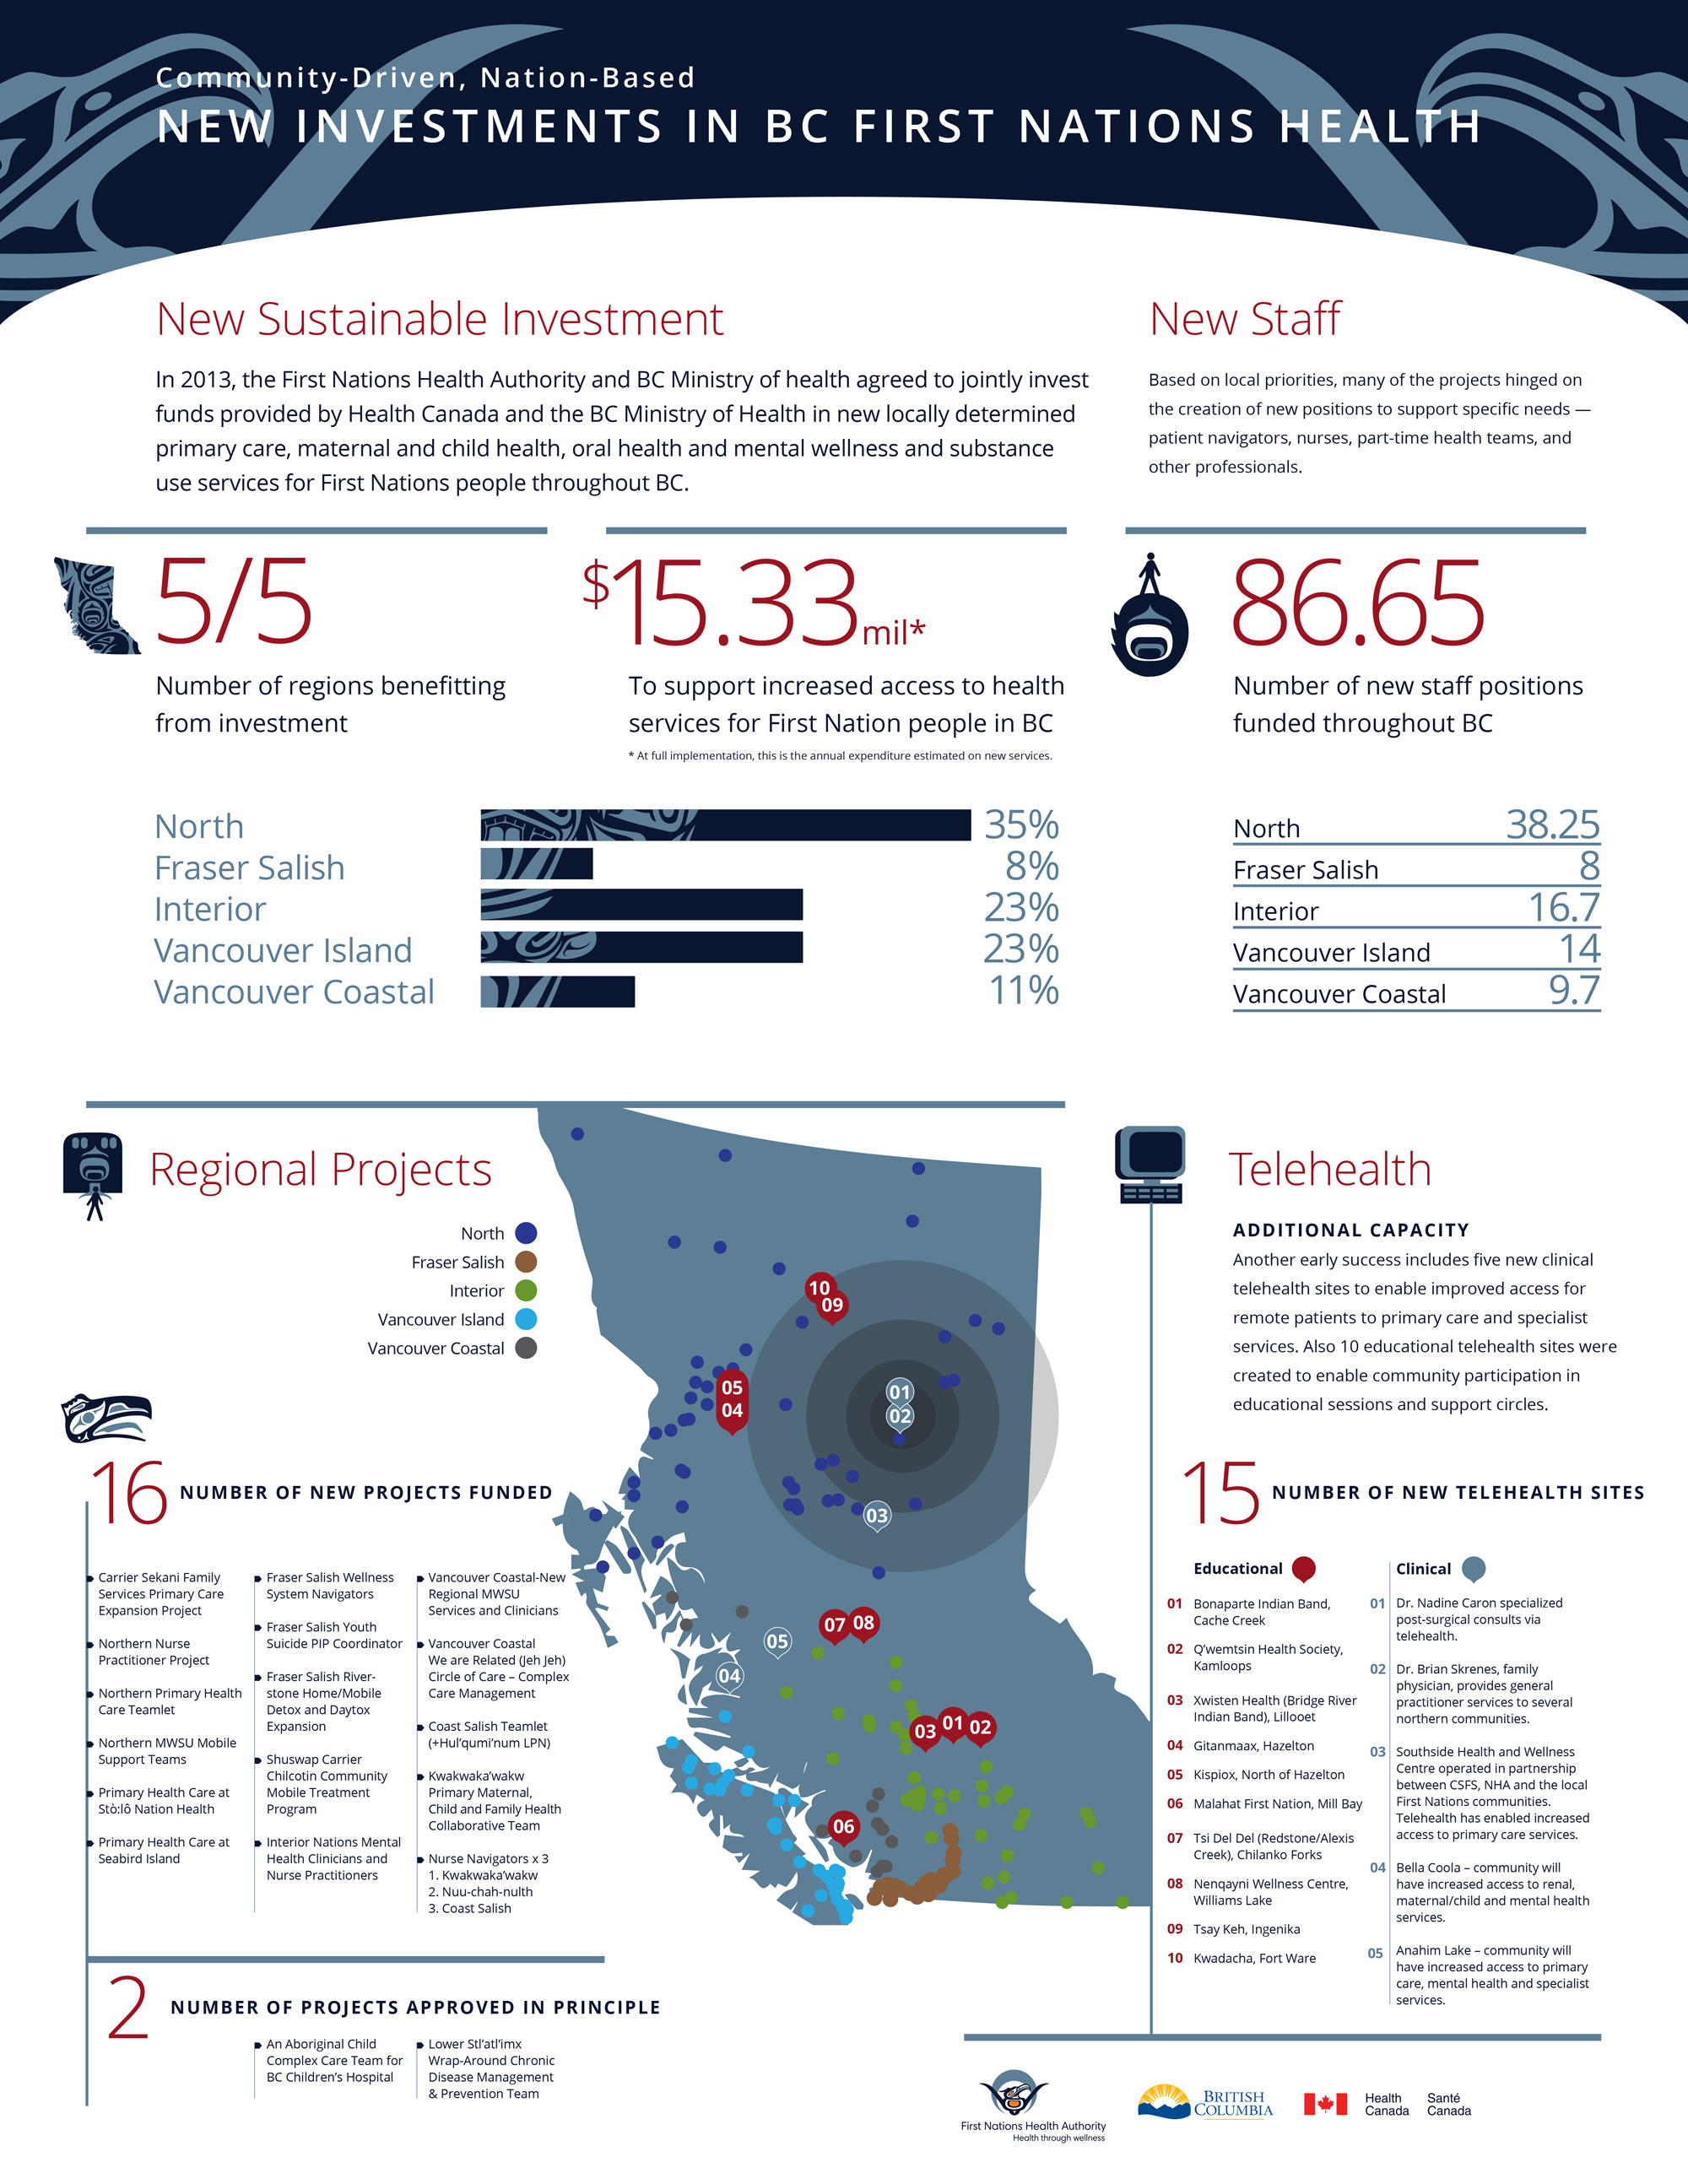 New-Investments-In-BC-First-Nations-Health-Infographic-small.jpg